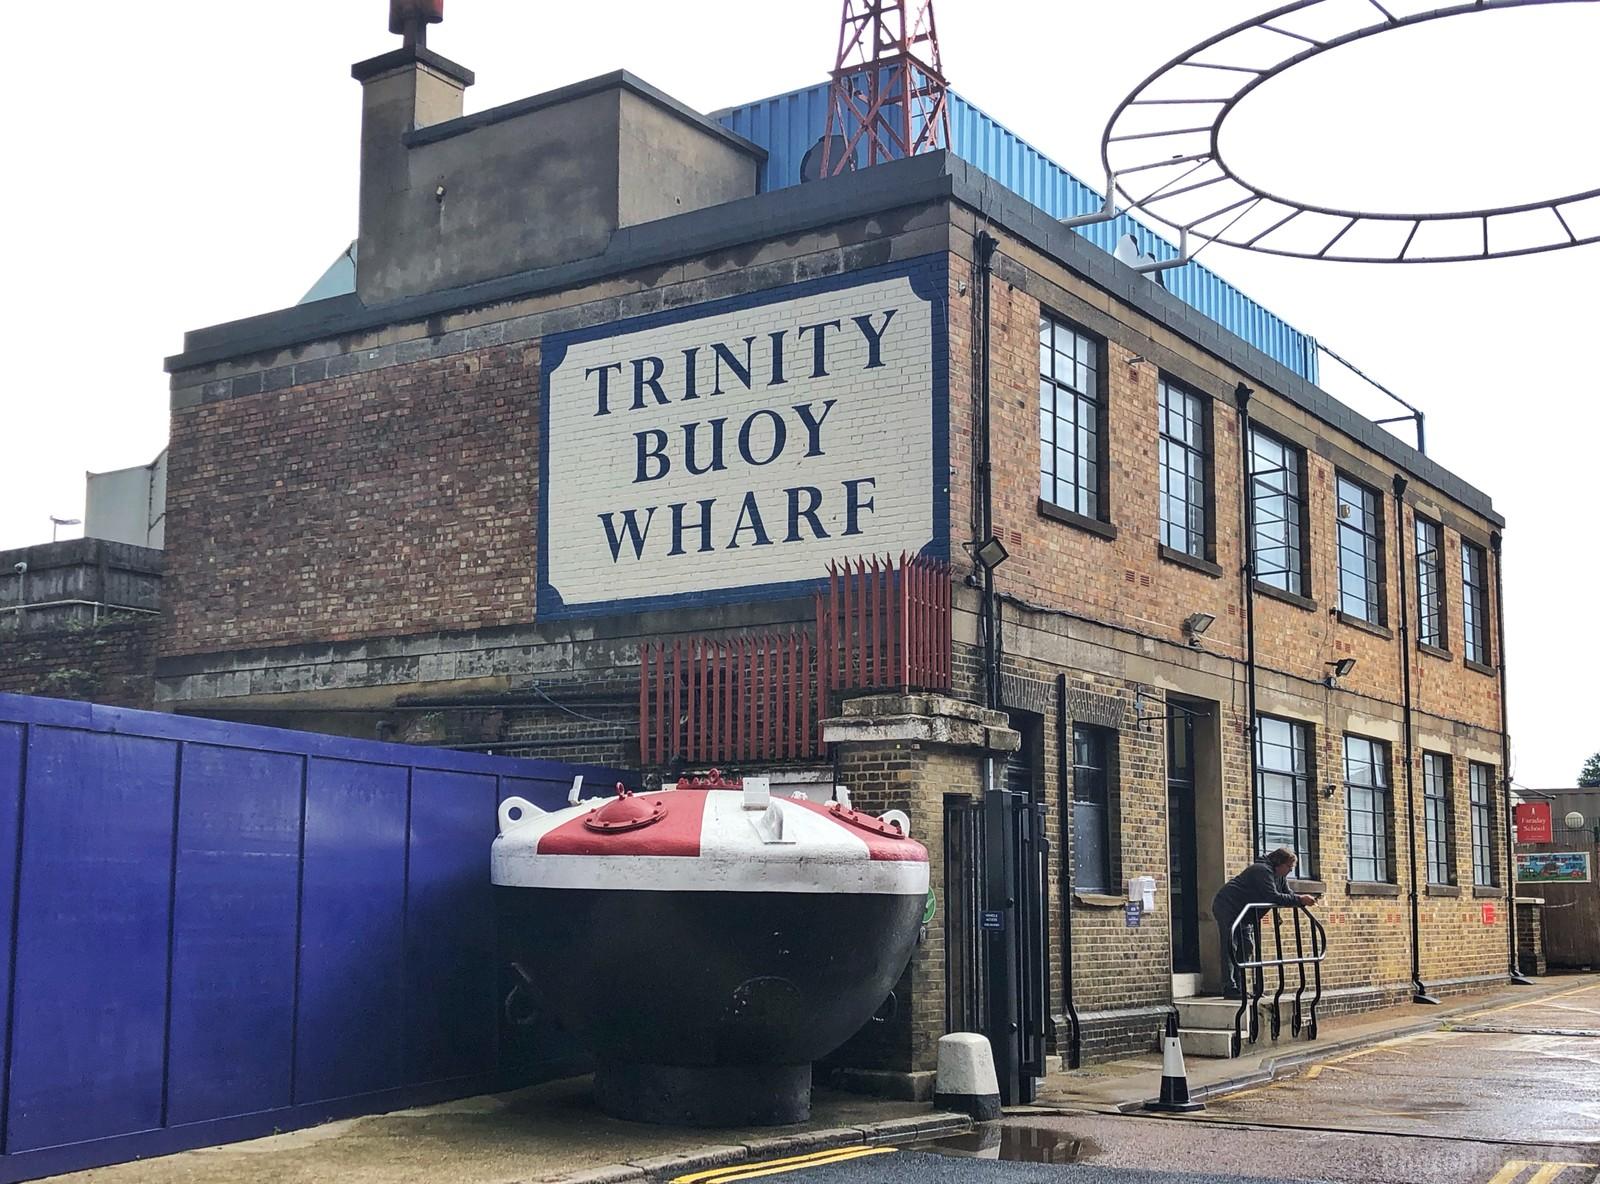 Image of Trinity Buoy Wharf by Jules Renahan